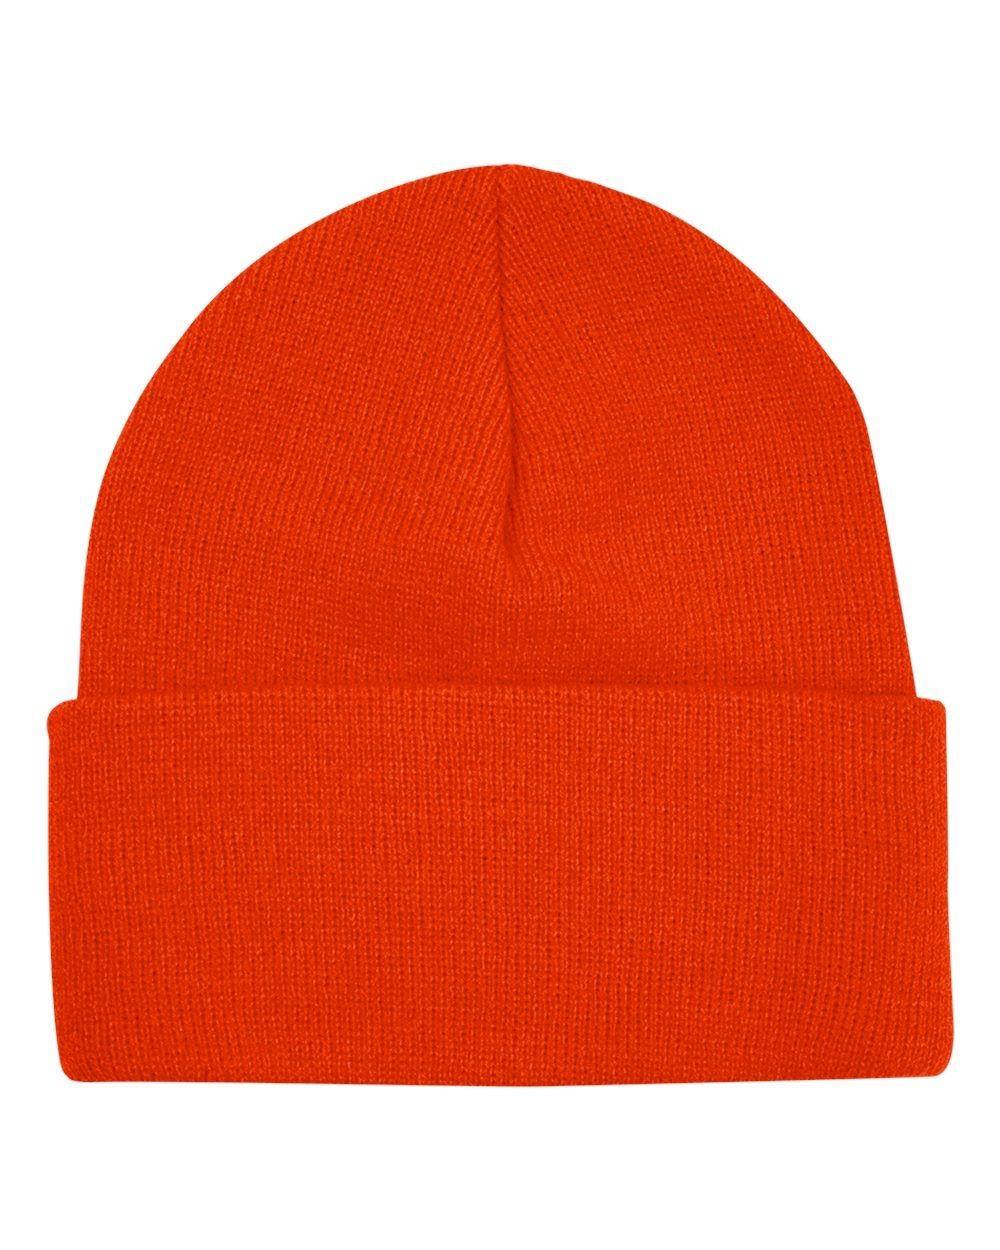 Bayside Made in the USA 12" Solid Knit Beanie Embroidery Blanks - BRIGHT ORANGE